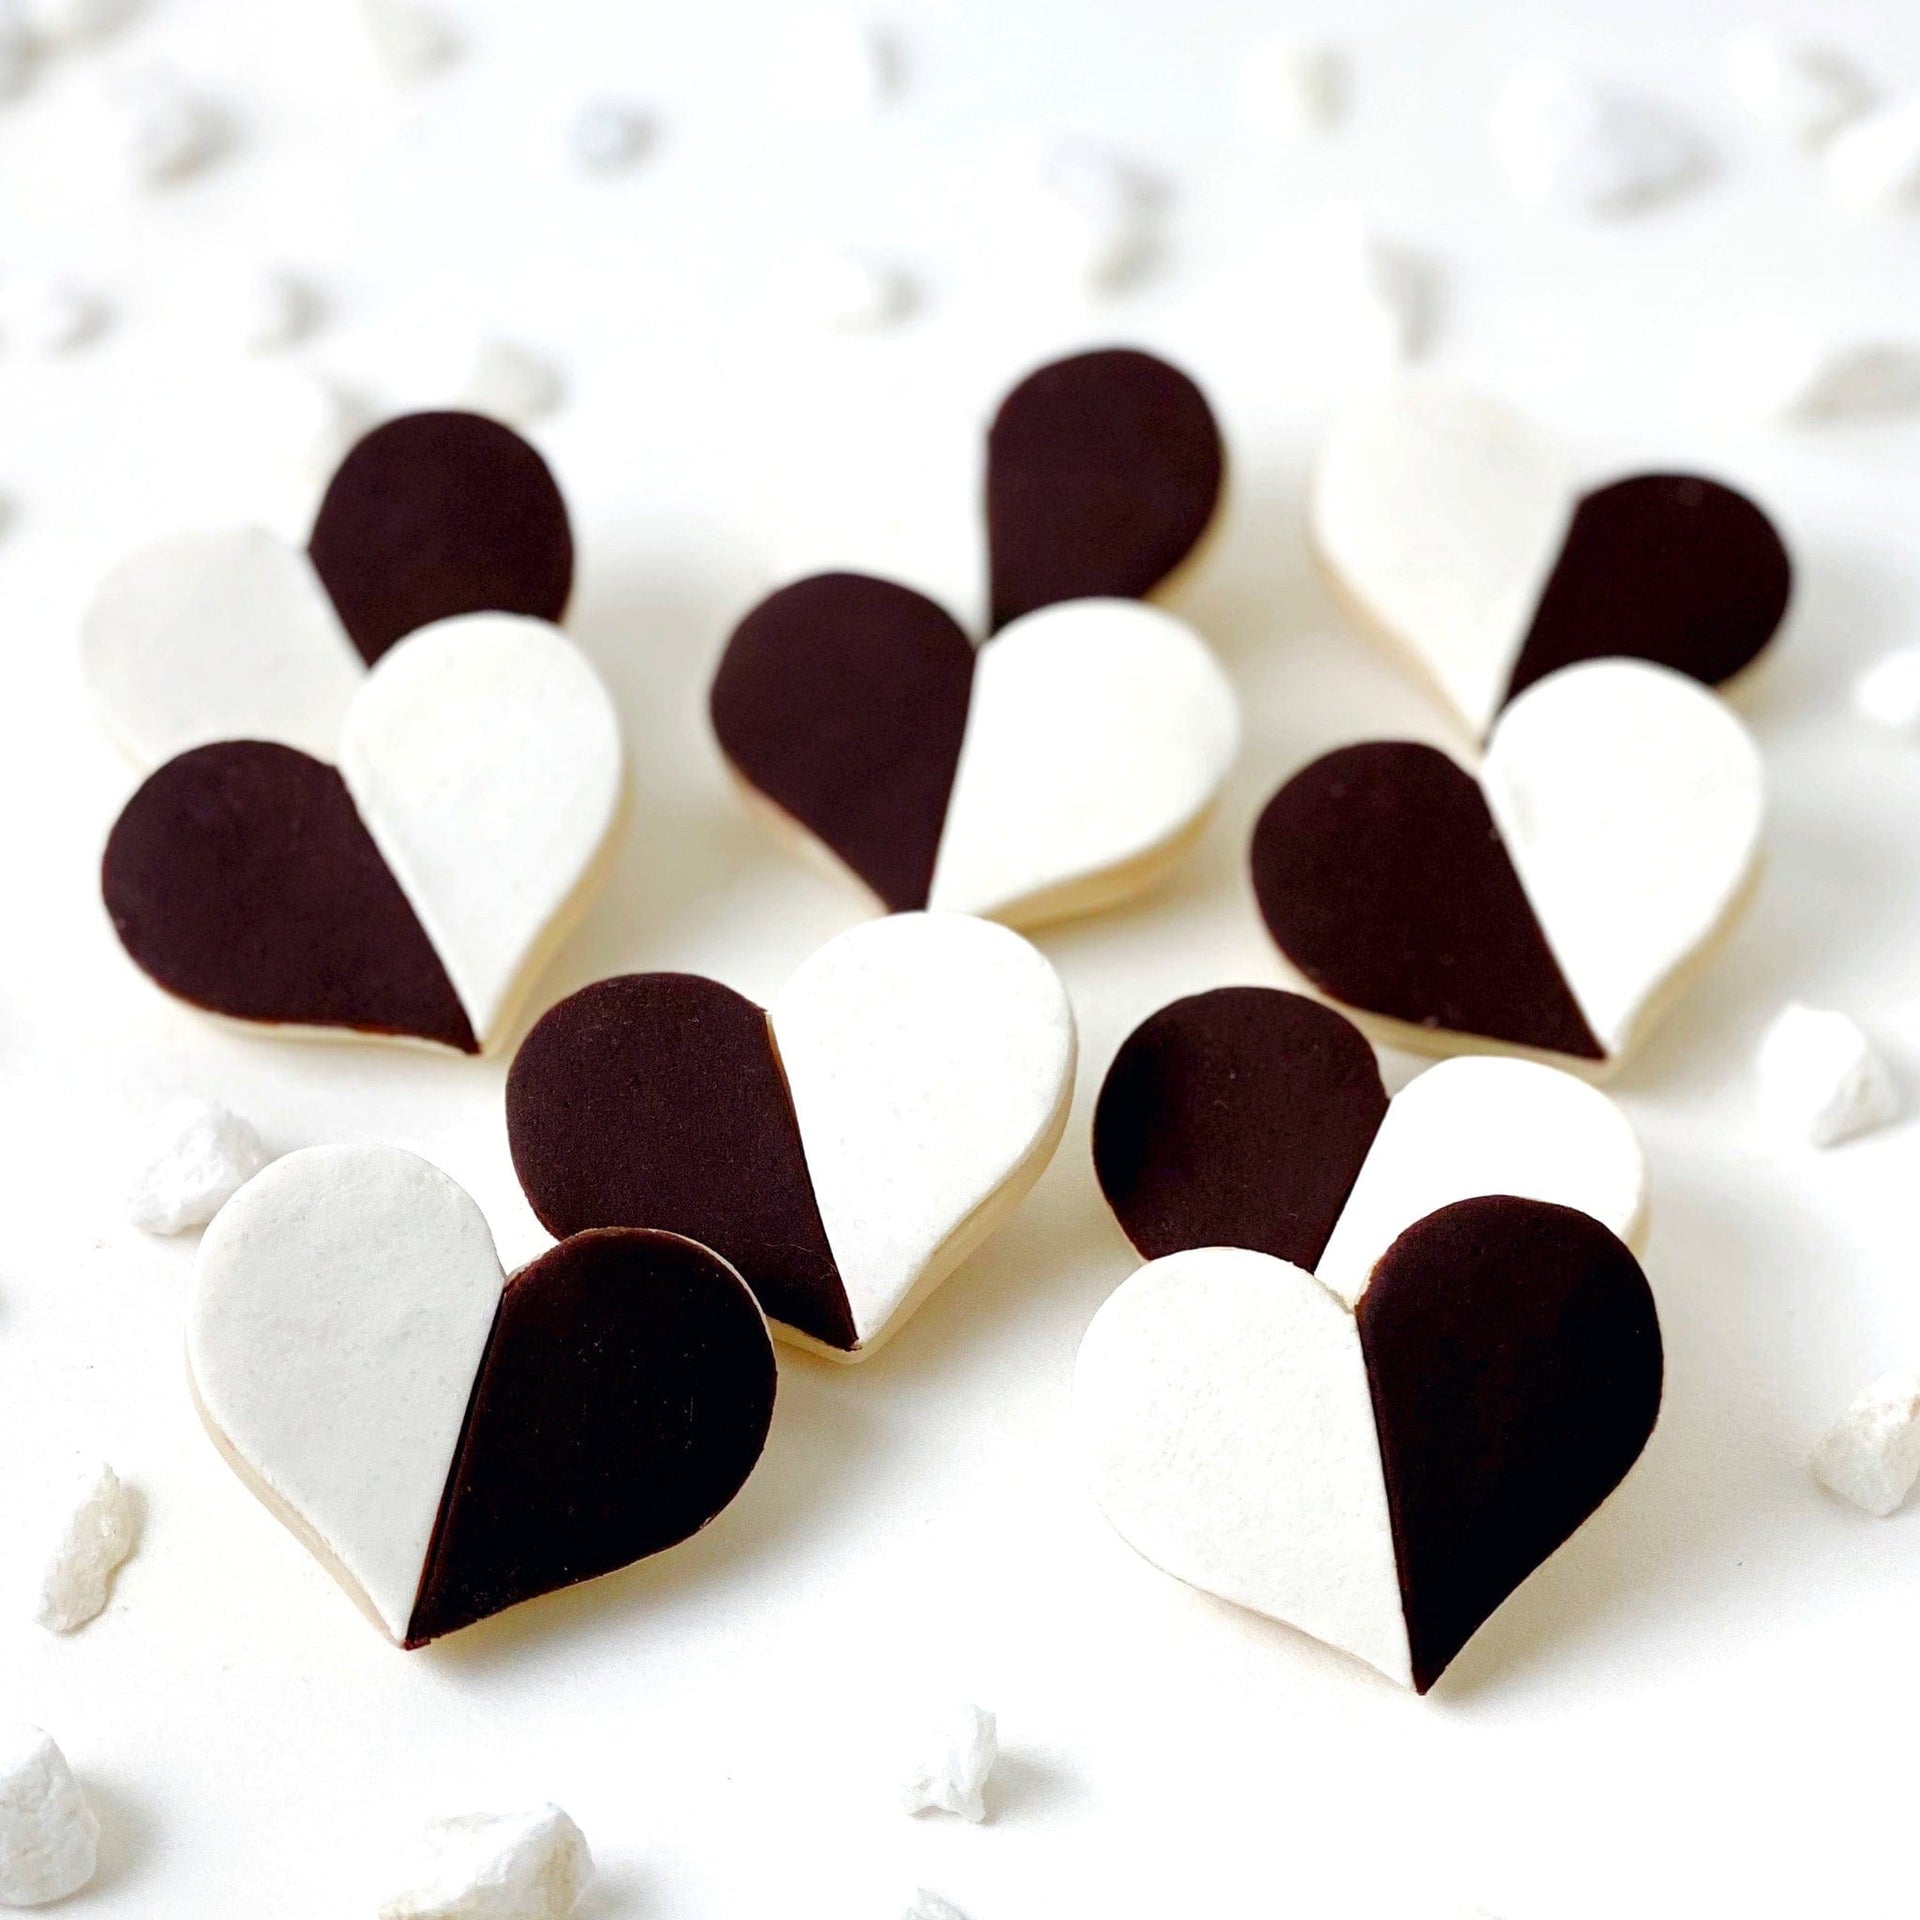 Marzipops Food Marzipan Black and White Heart Cookies